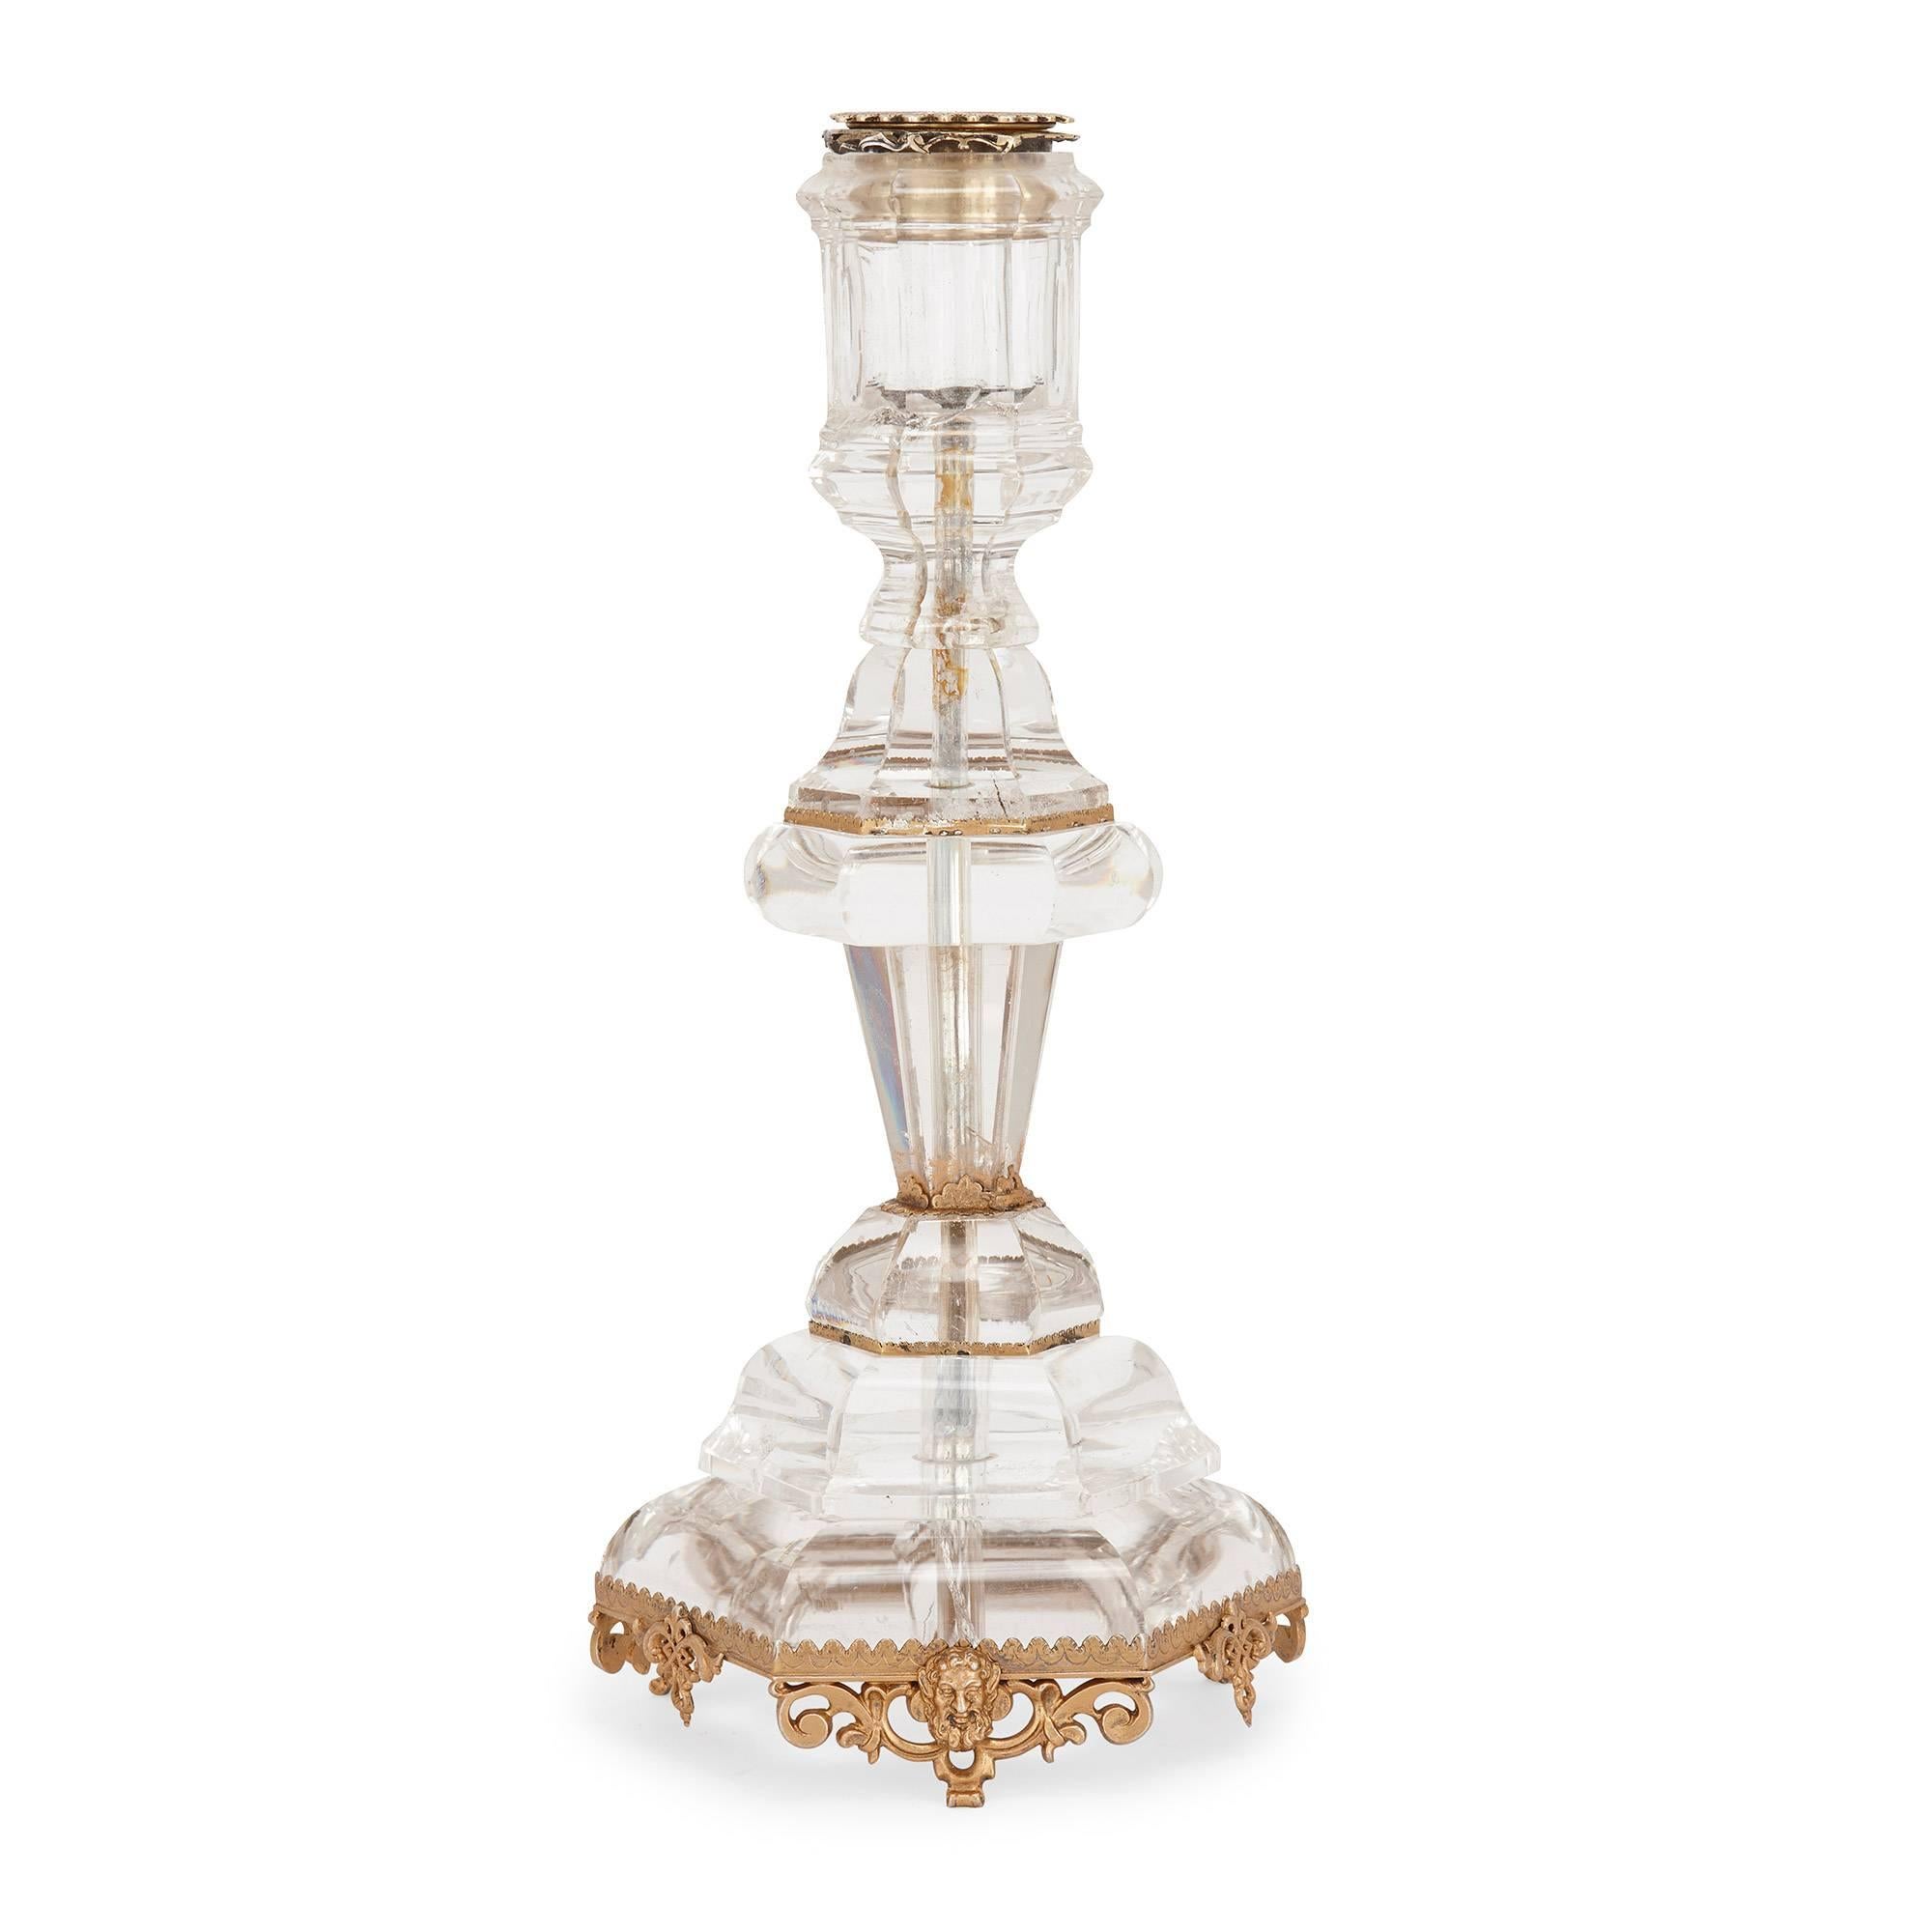 The candlestick bodies of fine, translucent rock crystal accented with silver gilt mounts; the candlestick base mounts decorated with neo-Gothic style patterns and masked faces.

The neo-Gothic style was a movement that began in England during the